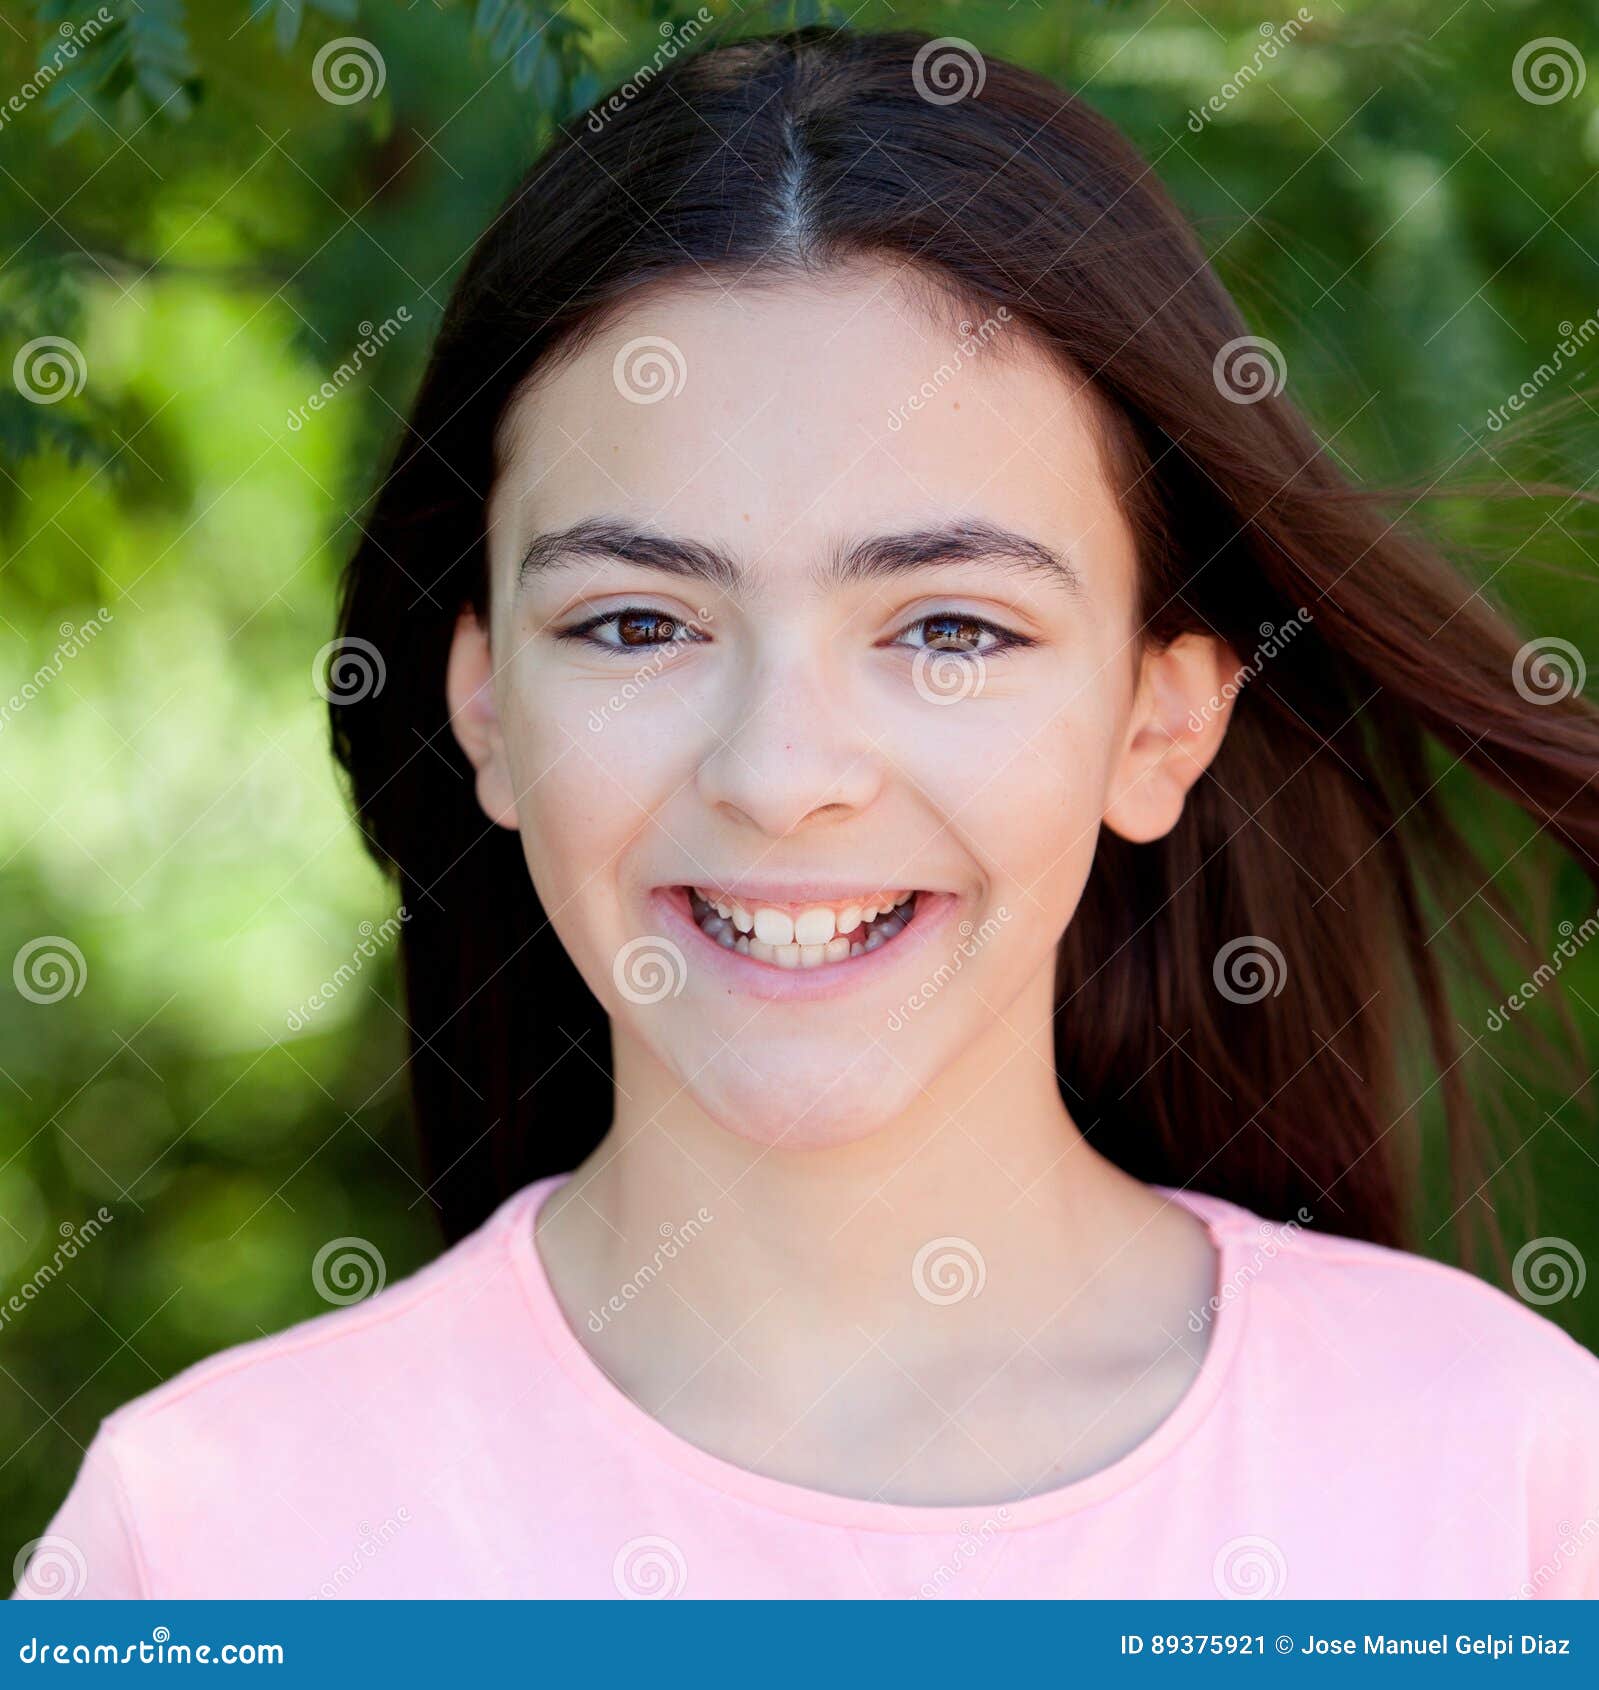 Adorable preteen stock image. Image of enjoy, outdoors - 89375921